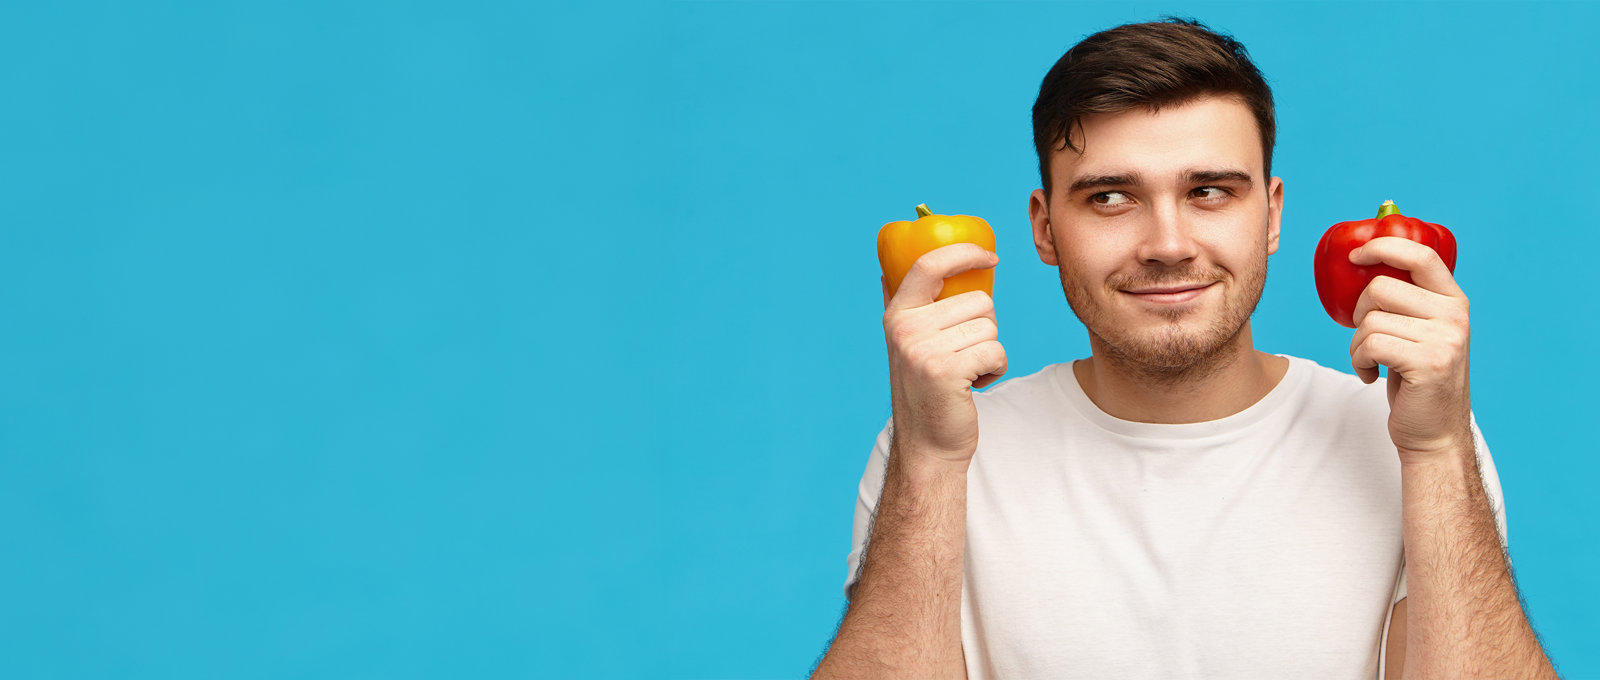 Photo of a man holding a red pepper in one hand and a yellow pepper in the other hand. Standing in front of a blue background